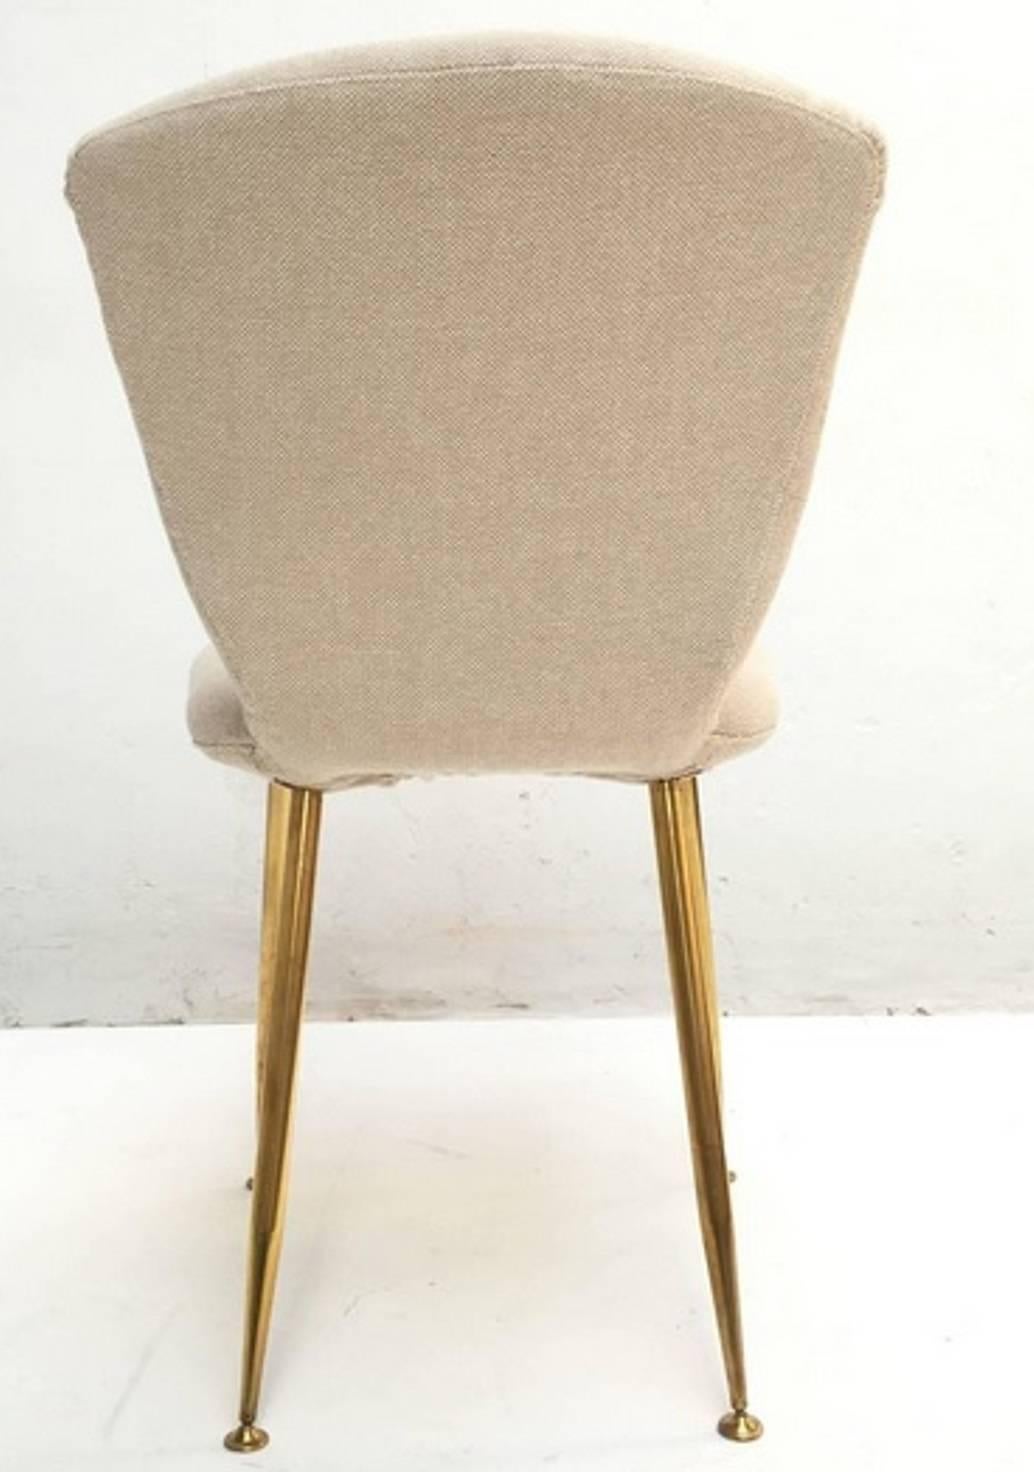 Mid-Century Modern Dining Chair by Louis Sognot for Arflex, 1959, Brass Legs, Upholstery Restored